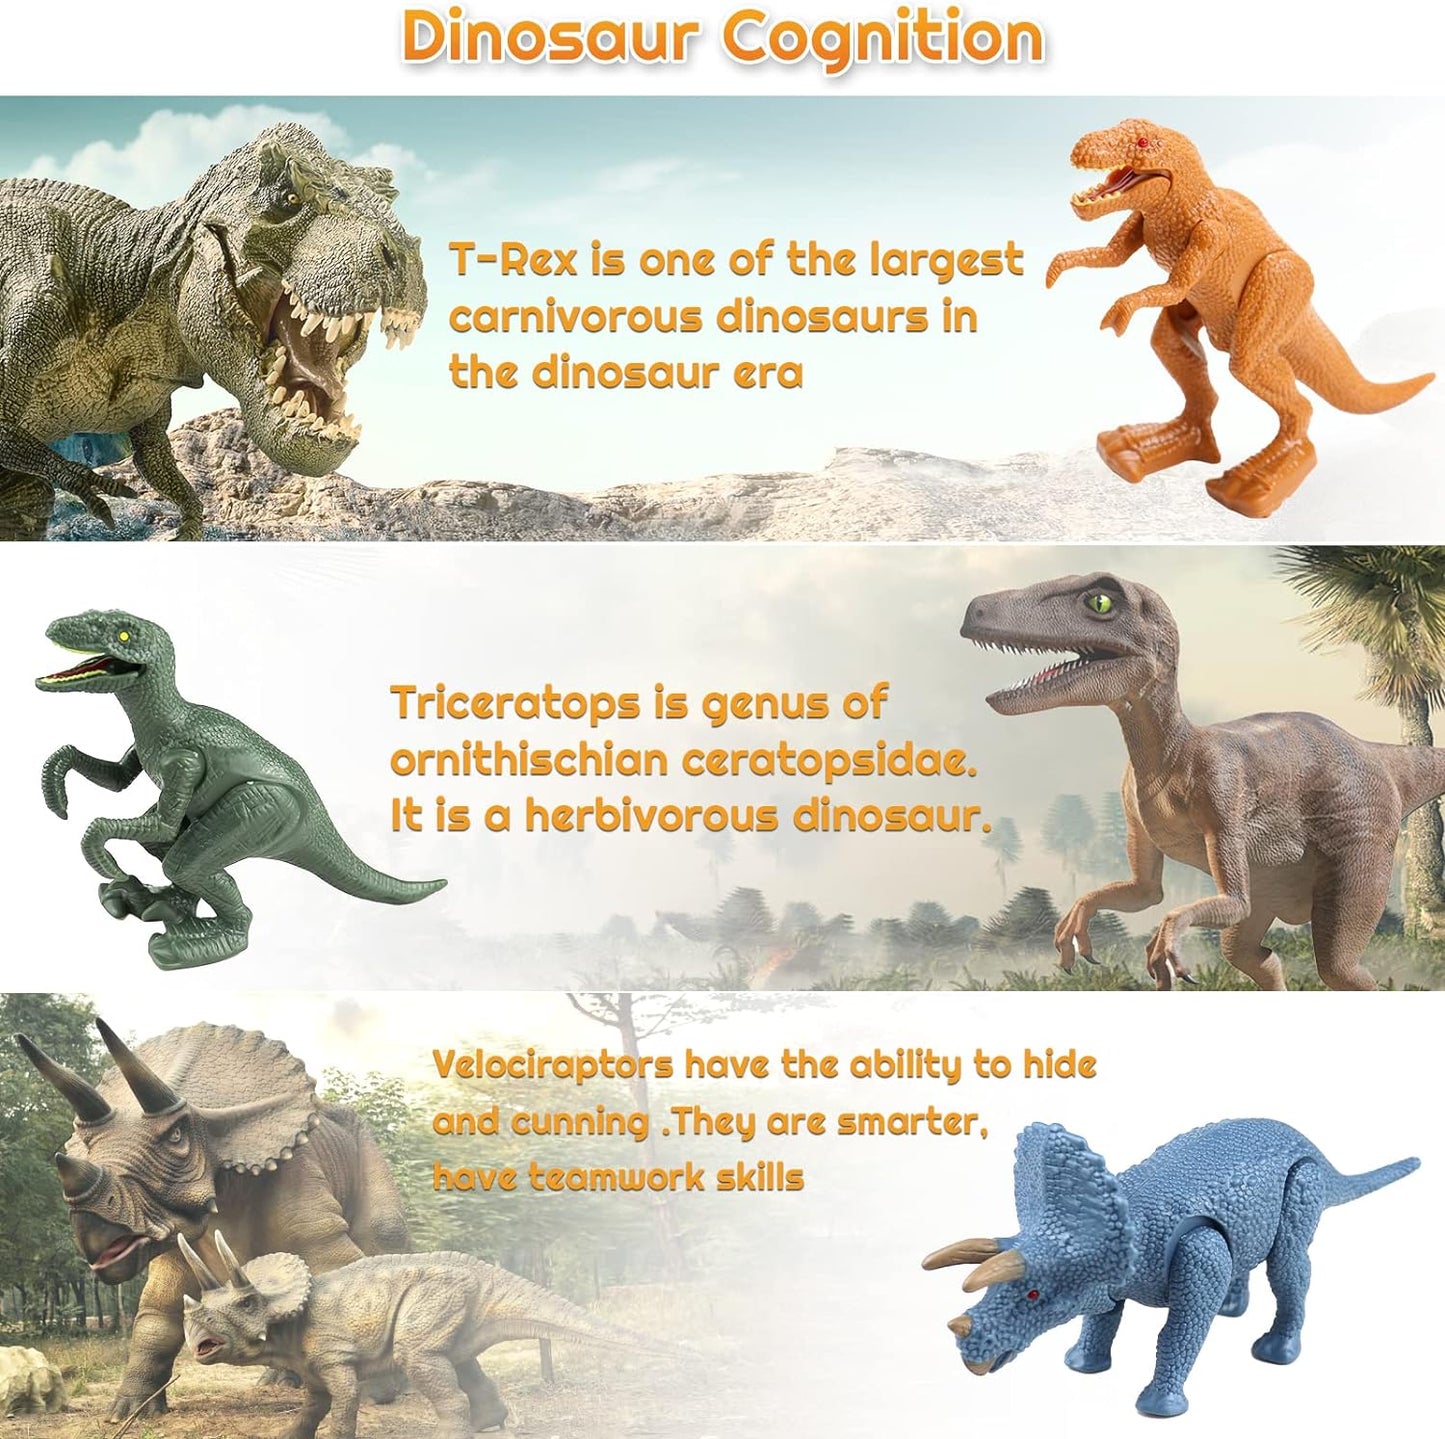 Easter Dinosaur Eggs Toys for Kids, Dinosaur Figures Reusable Dinosaur Fossils Surprise Egg Educational Toy Girls Boys Birthday Gifts Dinosaur Collection Toy for Kids 3 4 5 6 7 8 9 10+ Year Old